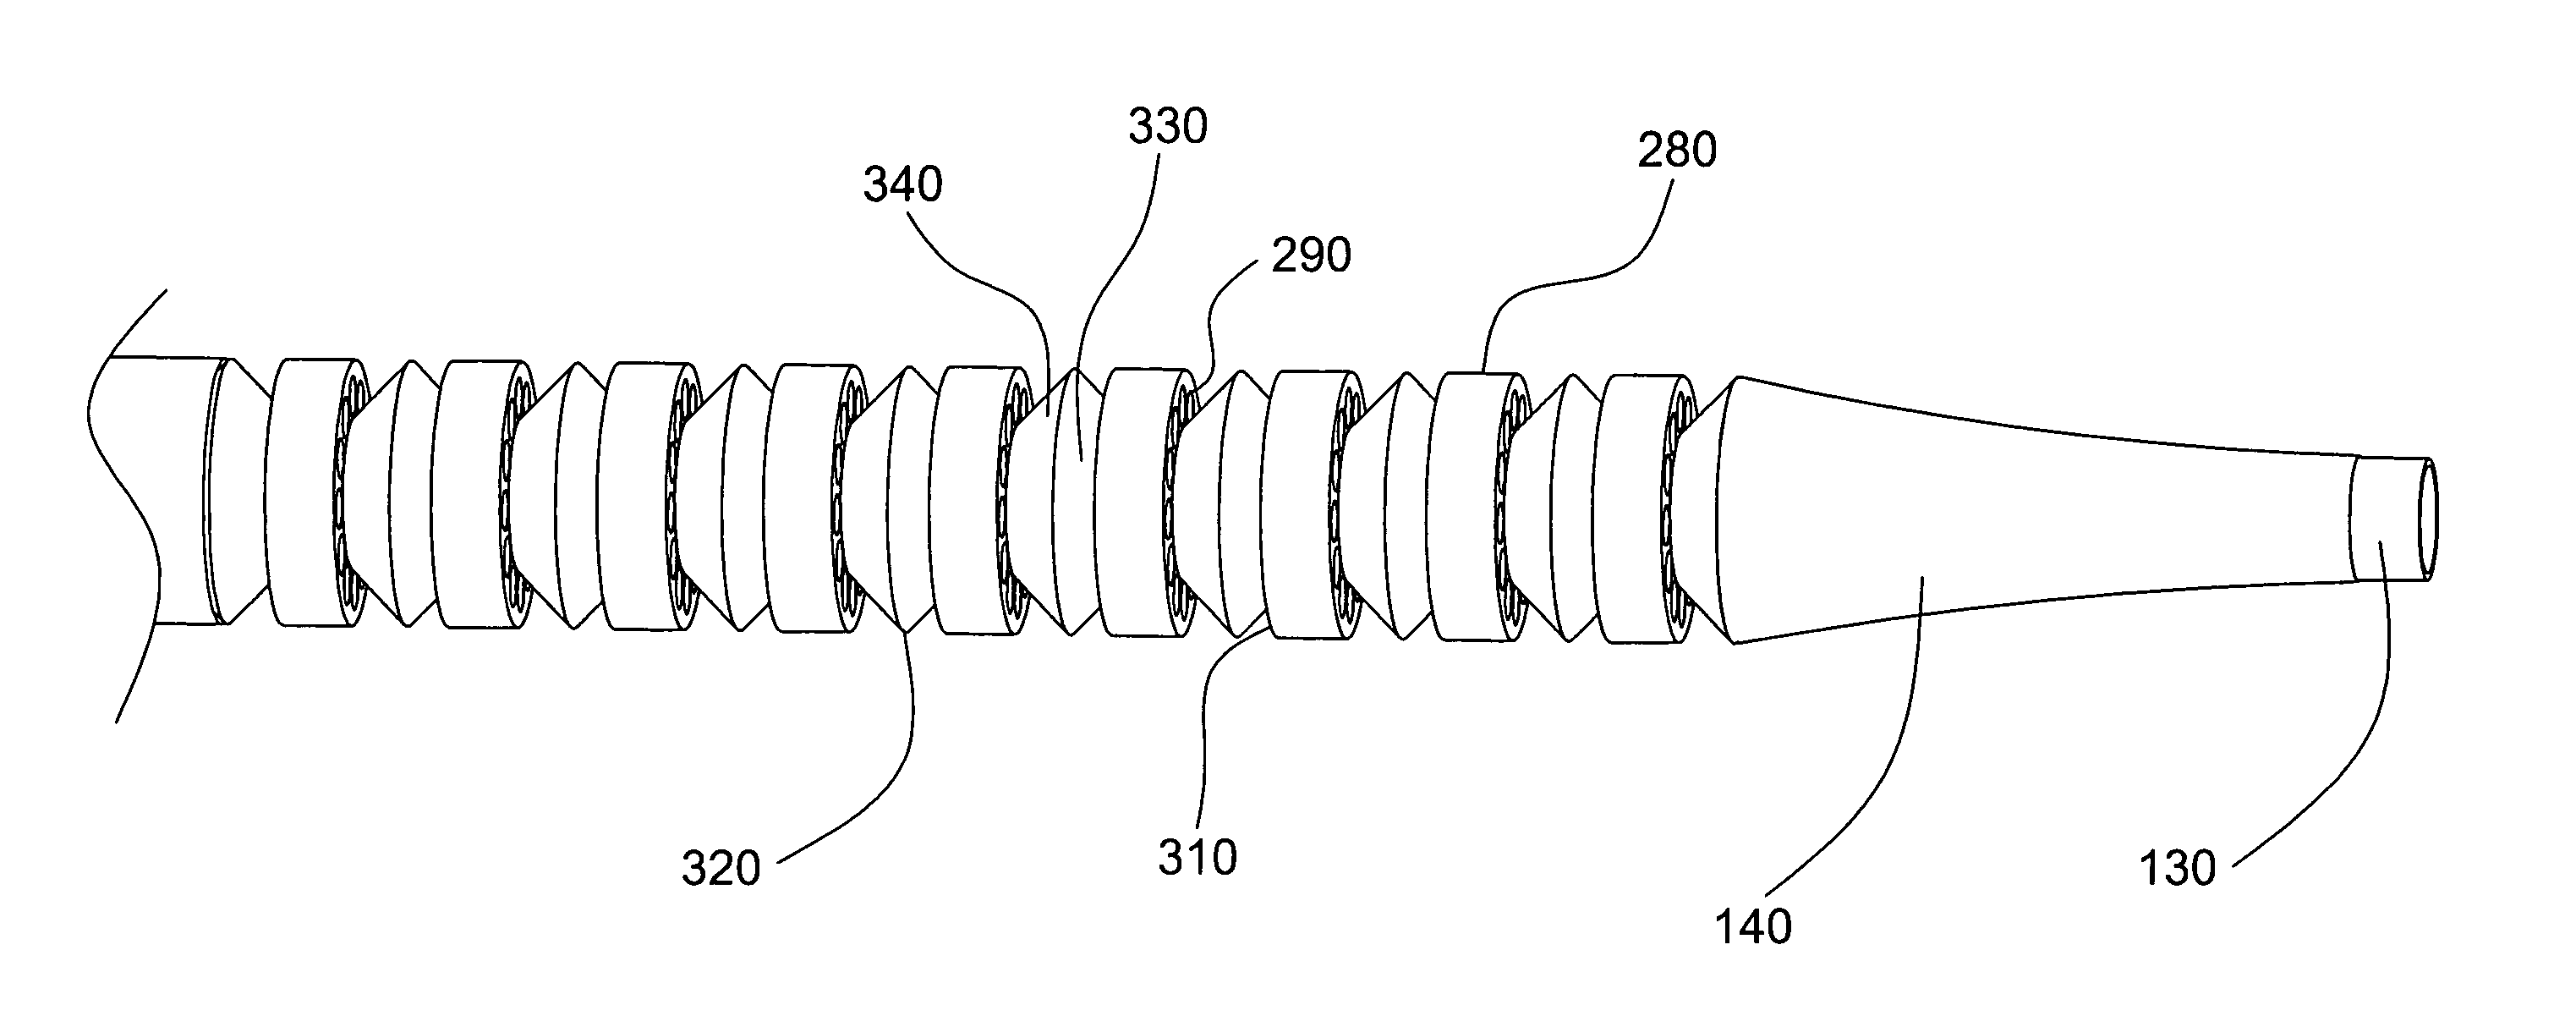 Capacitive microfabricated ultrasound transducer-based intravascular ultrasound probes